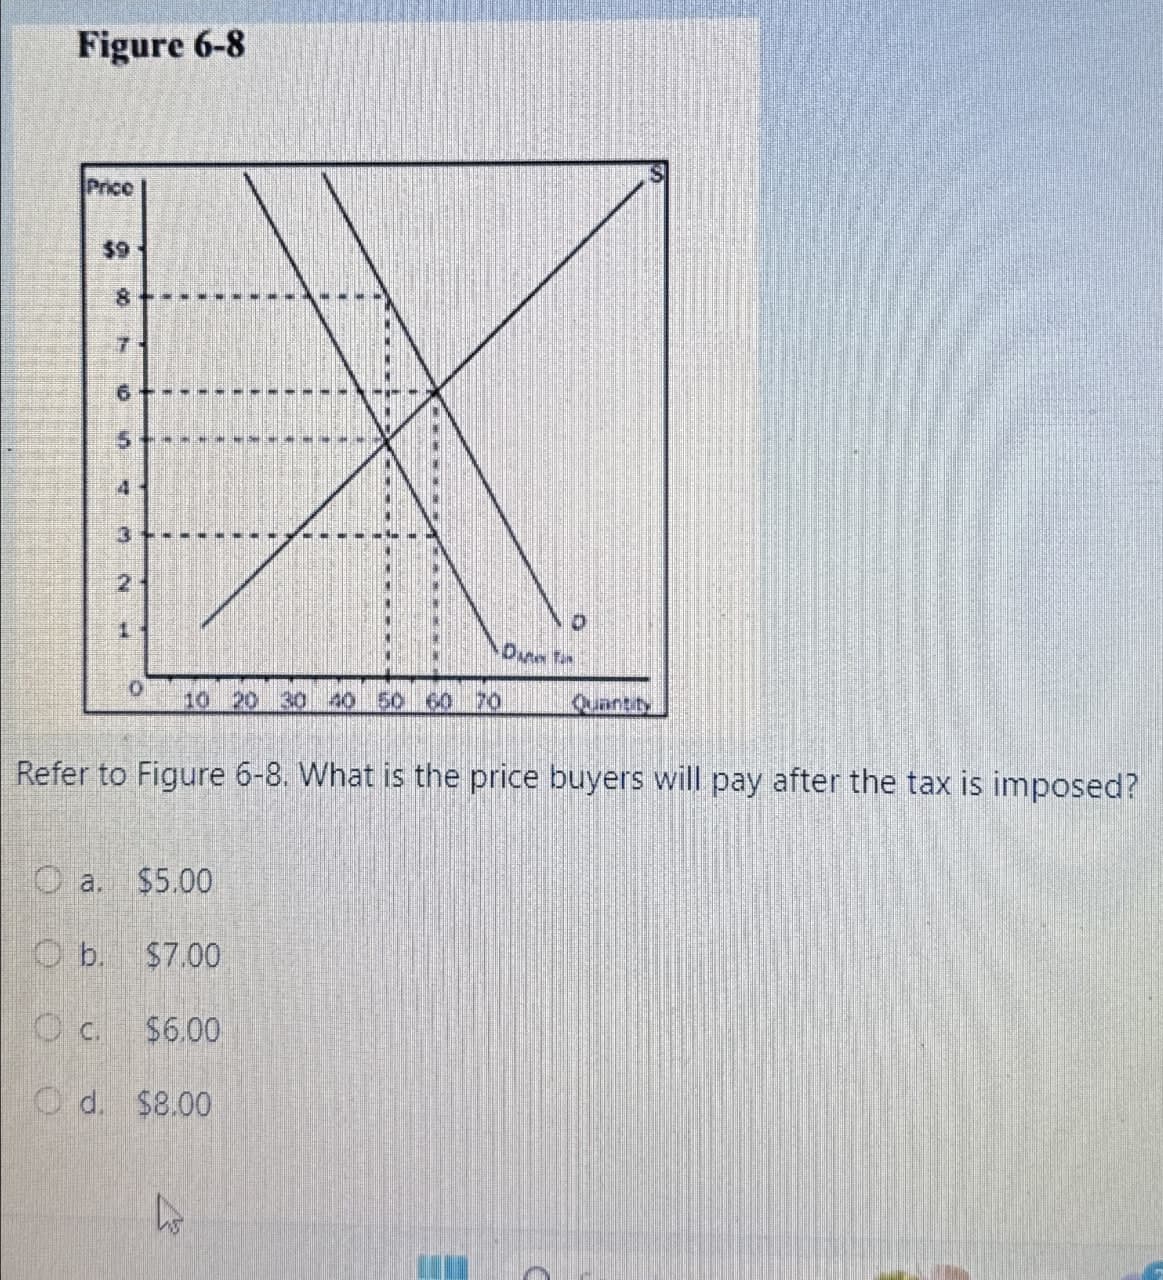 Figure 6-8
Price
$9
00
8
7
5
44
3
2
1
0
10 20 30 40 50 60 70
Quantity
Refer to Figure 6-8. What is the price buyers will pay after the tax is imposed?
a.
$5.00
O b.
$7.00
Oc. $6.00
Od. $8.00